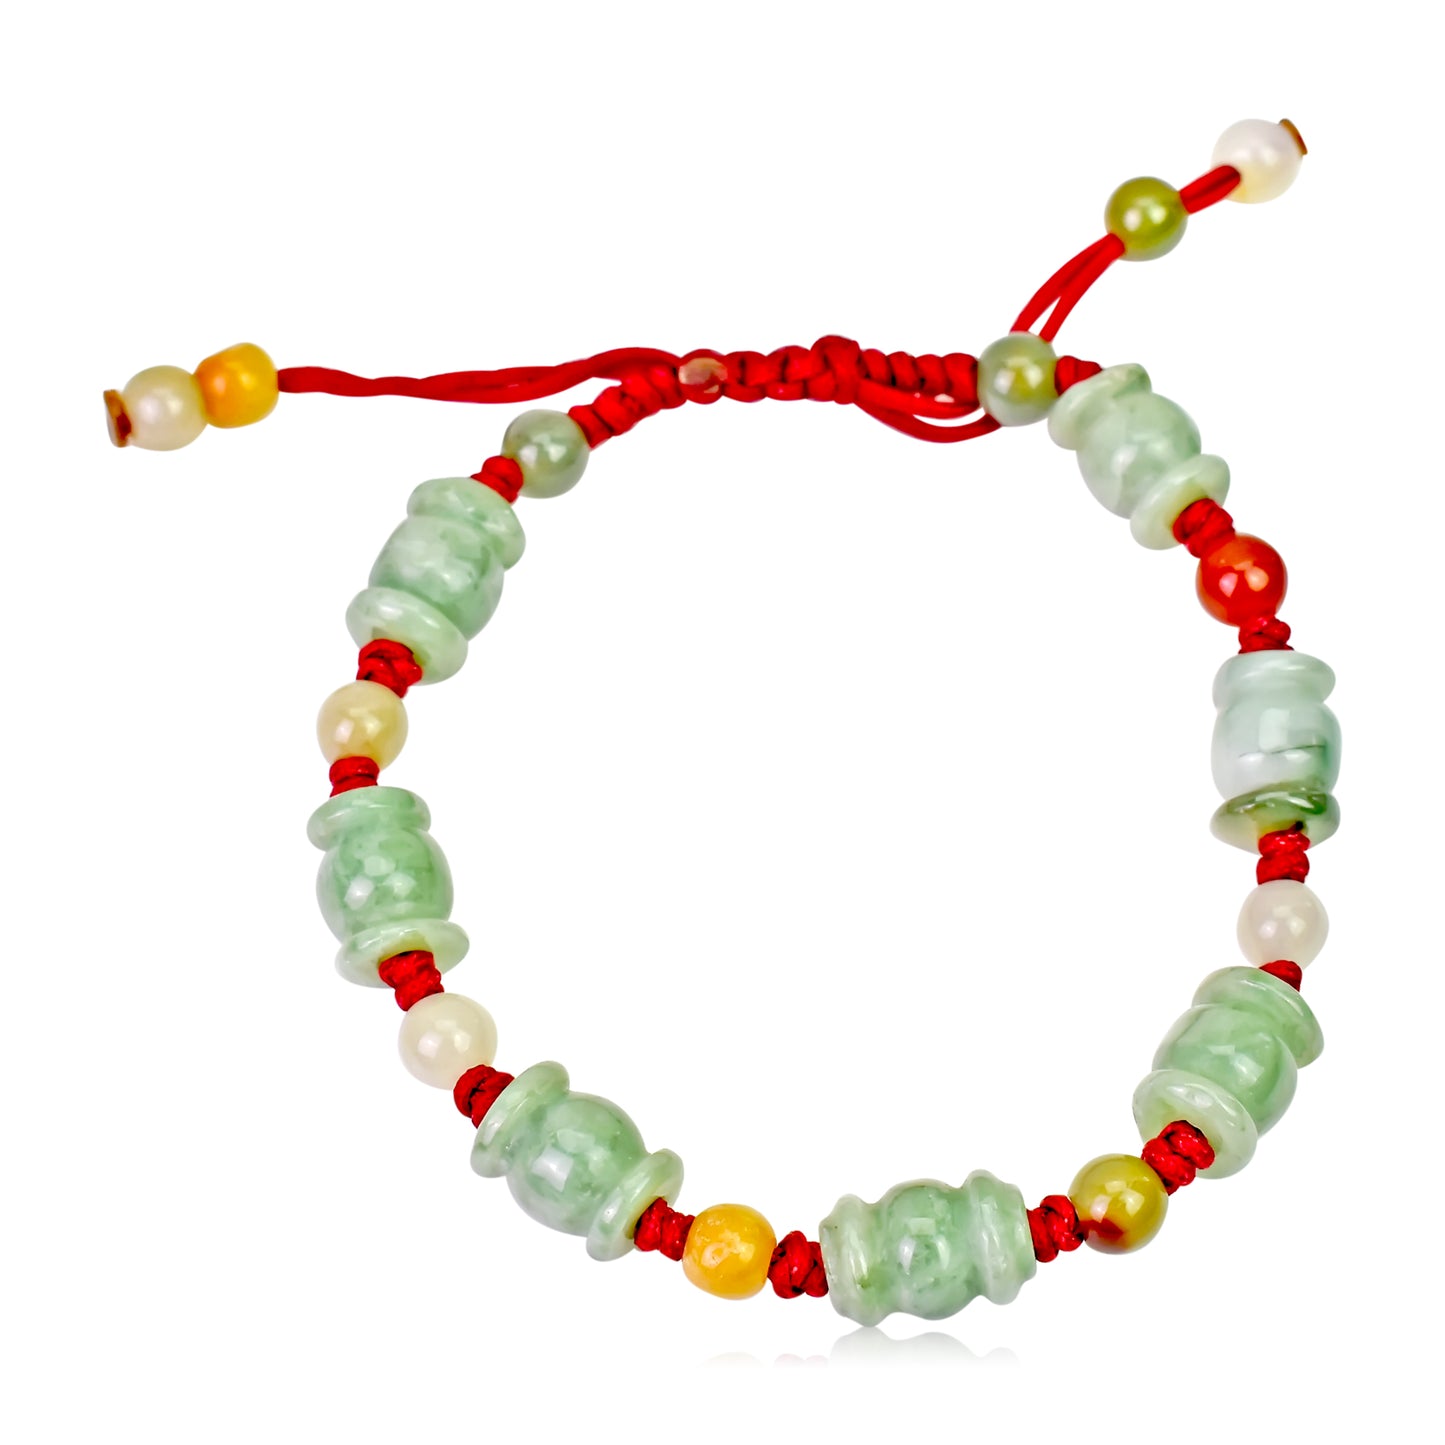 Look Stylish and Sophisticated with a Bamboo Handmade Jade Bracelet